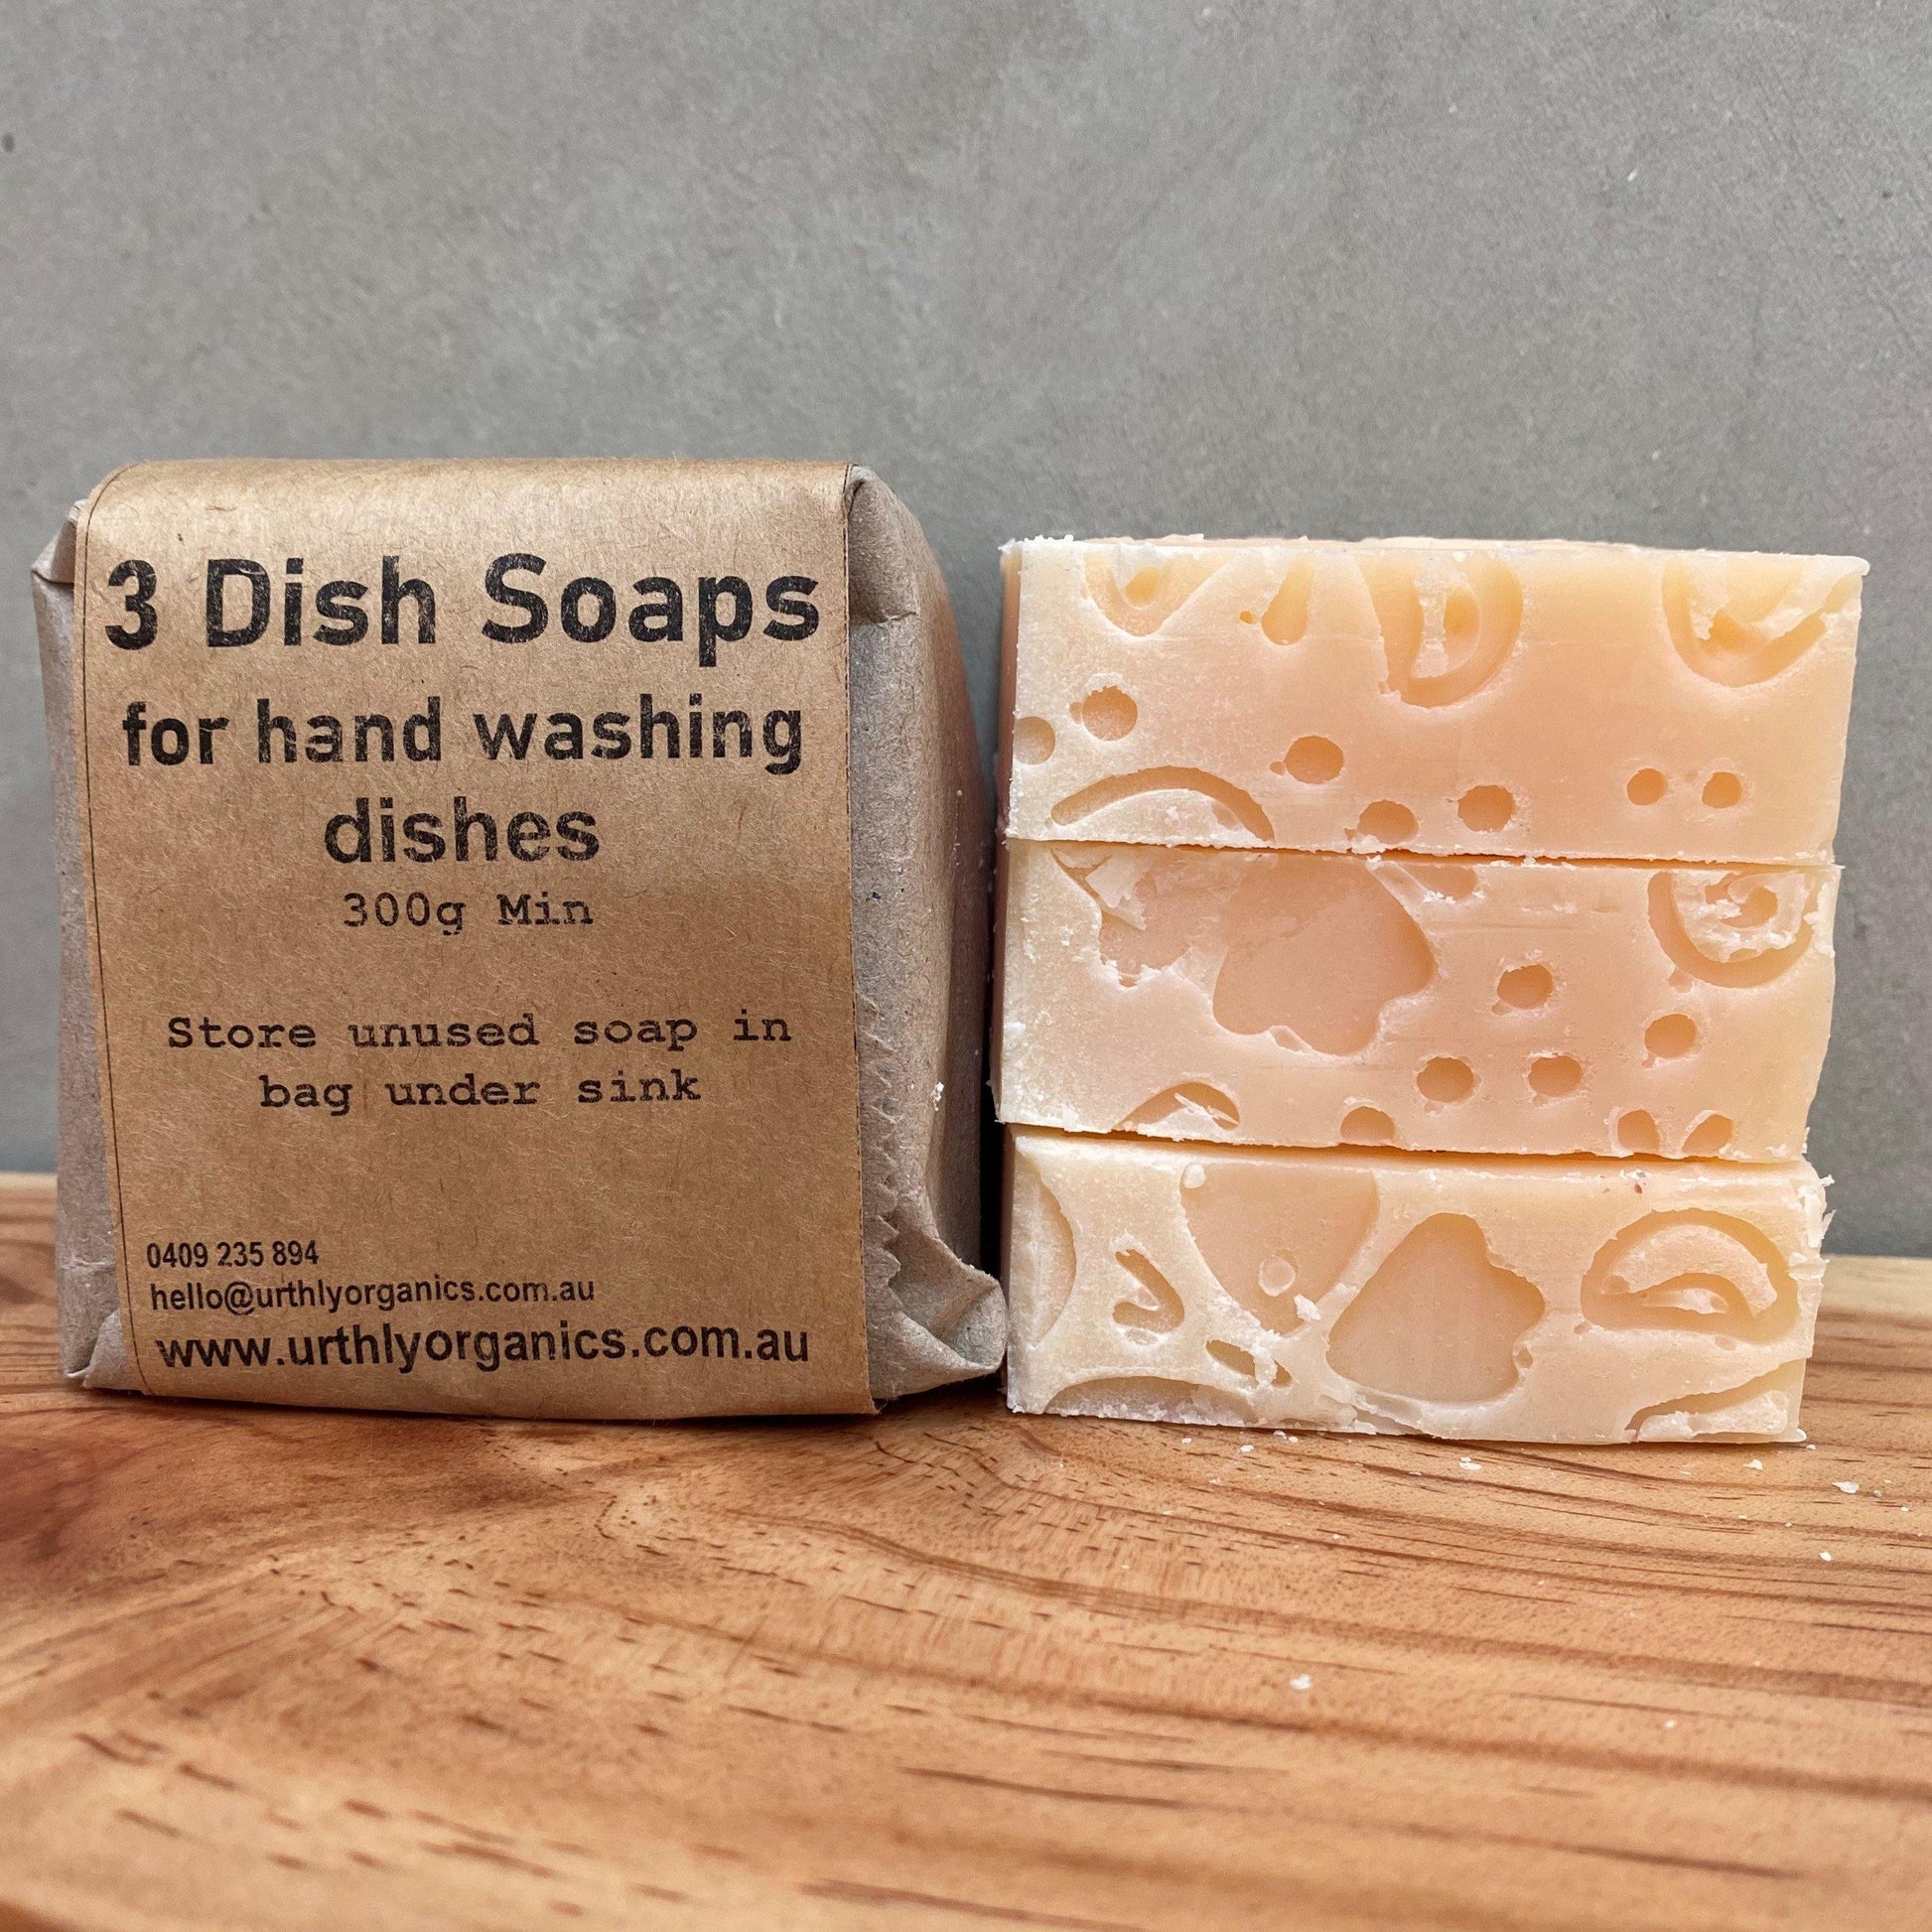 Dish soap 3 pack - UrthlyOrganics Natural ethical skincare and cleaning